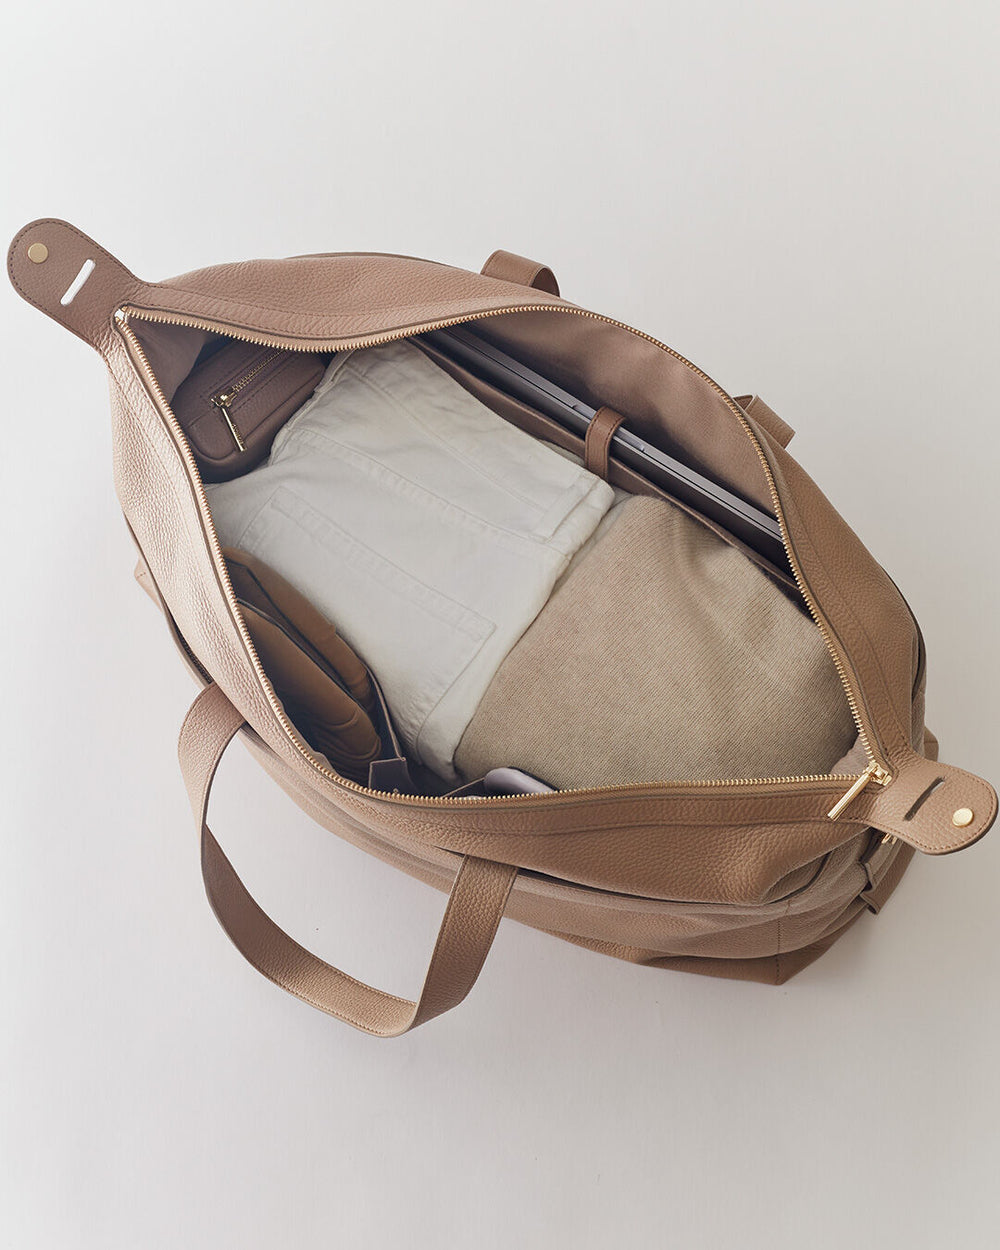 Open bag with a laptop and folded clothes inside.